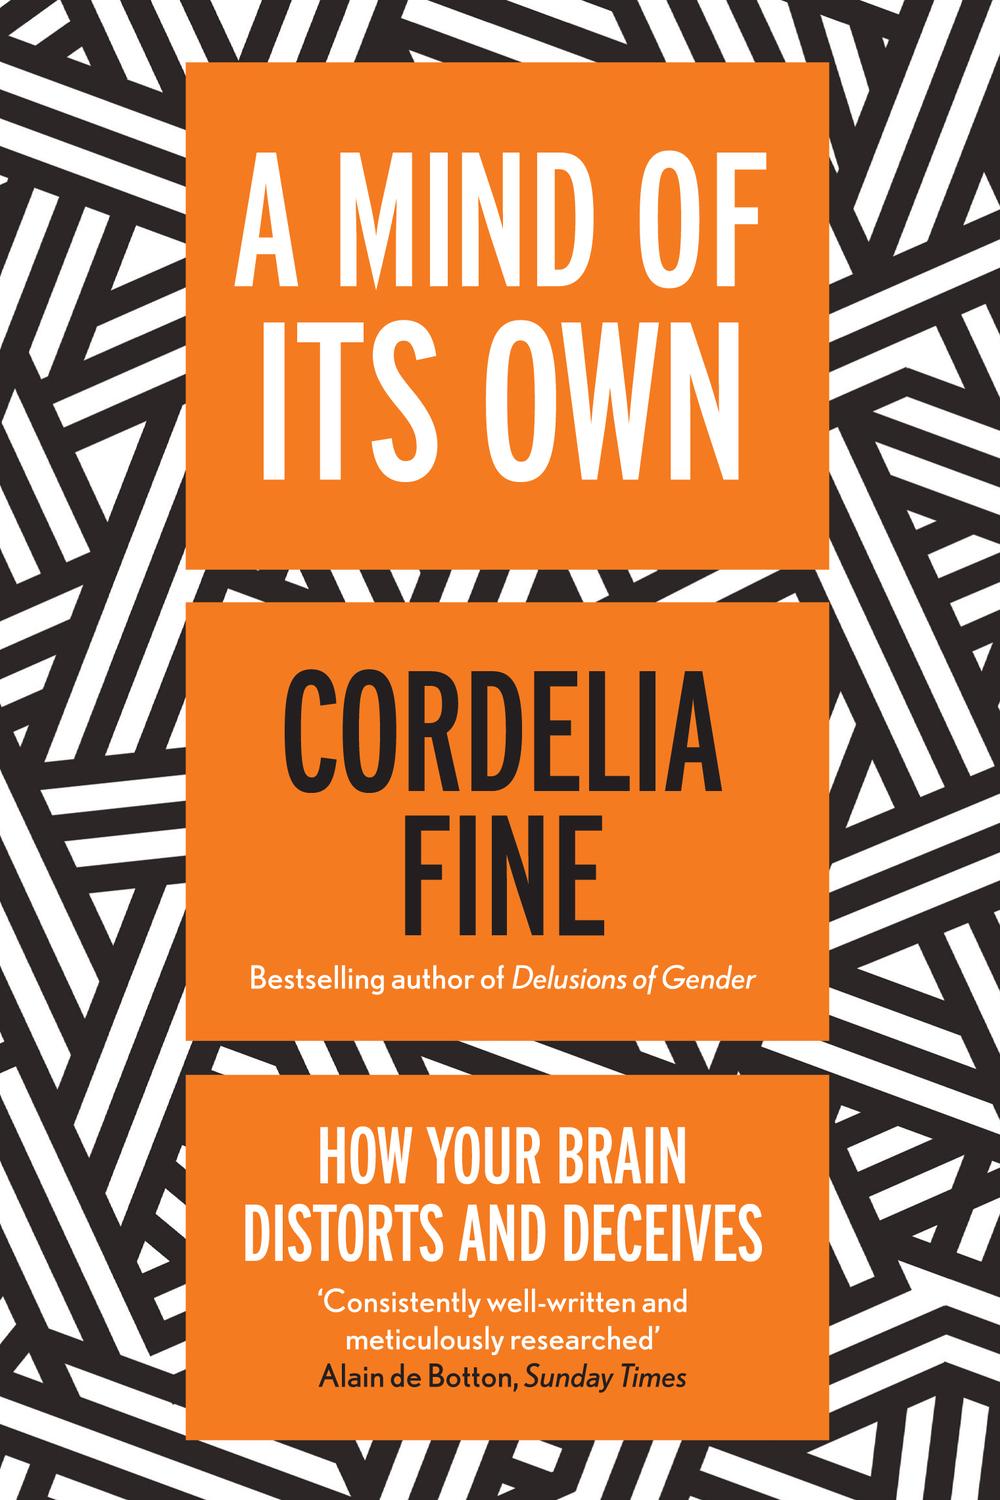 A Mind of Its Own - Cordelia Fine